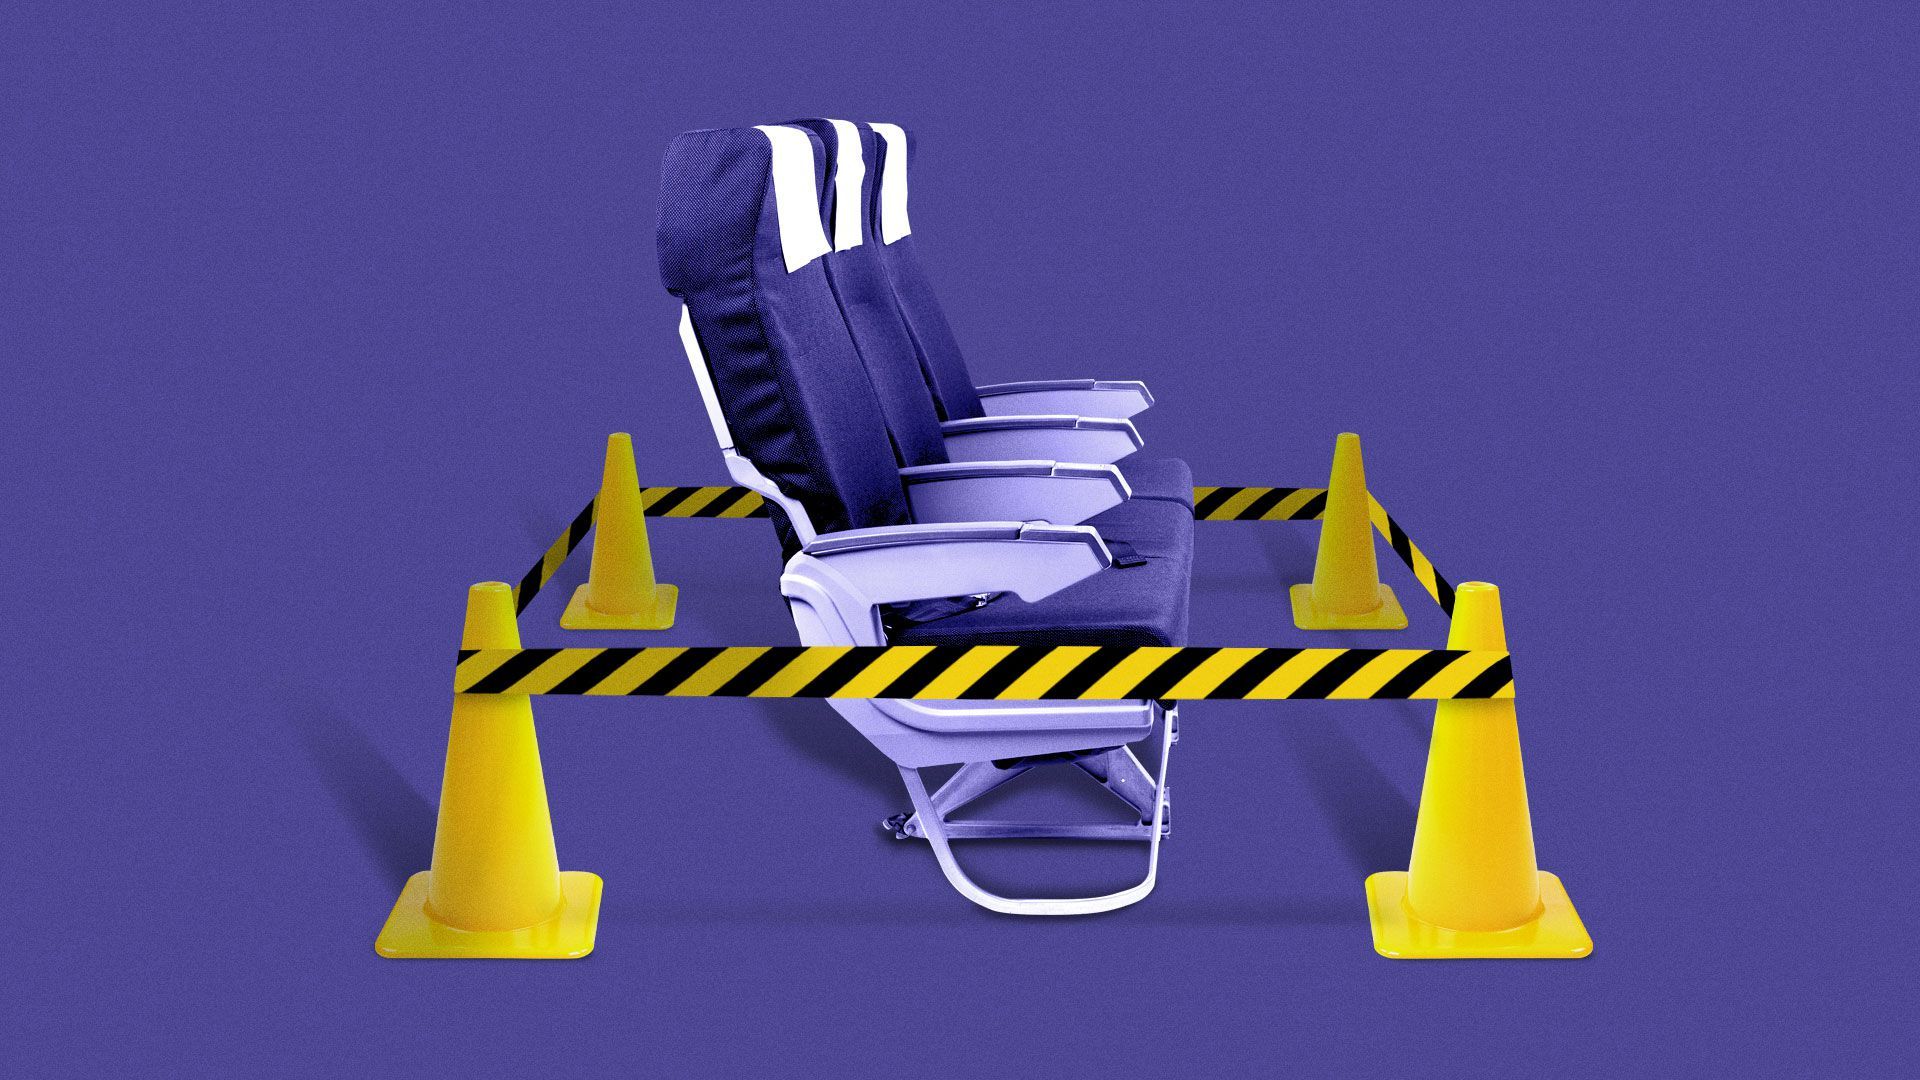 Illustration of airplane seat cordoned off by caution tape